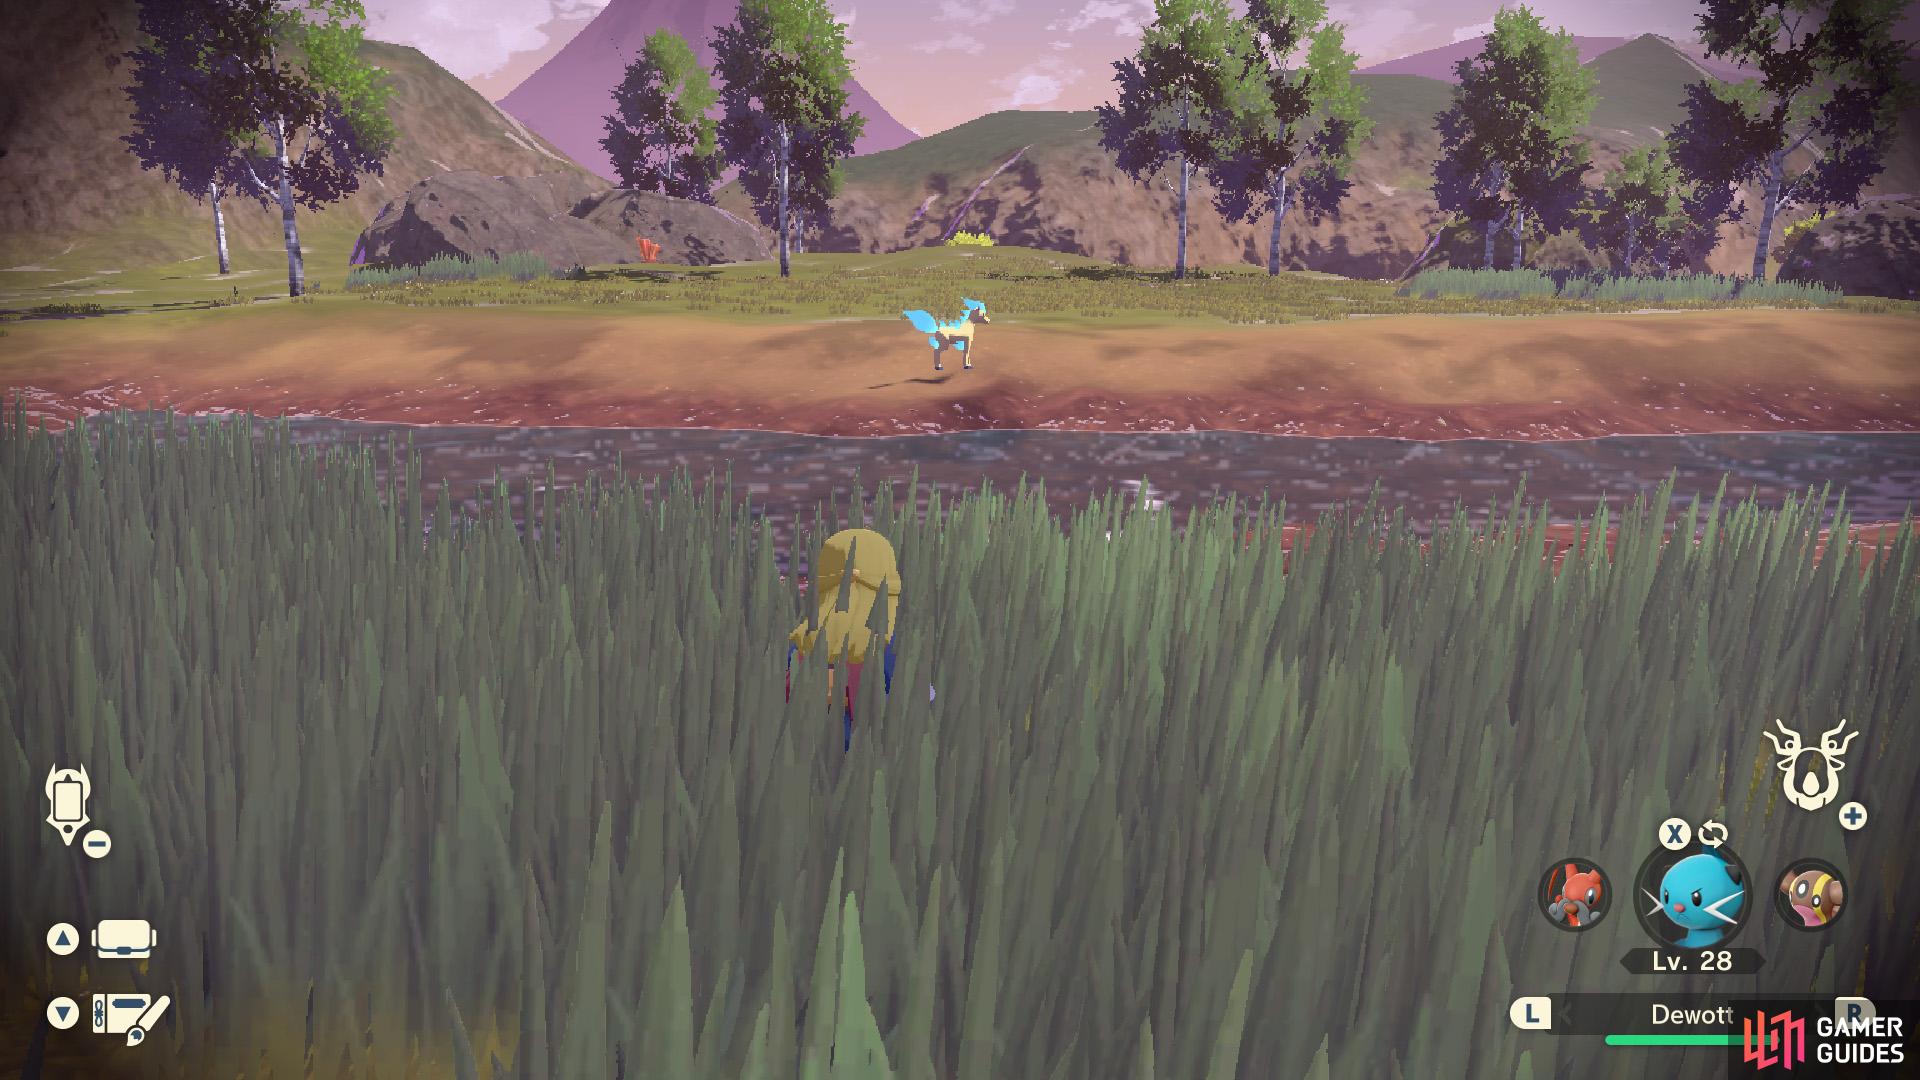 Approach the Ponyta carefully, using bait such as Oran Berries to distract it if necessary.